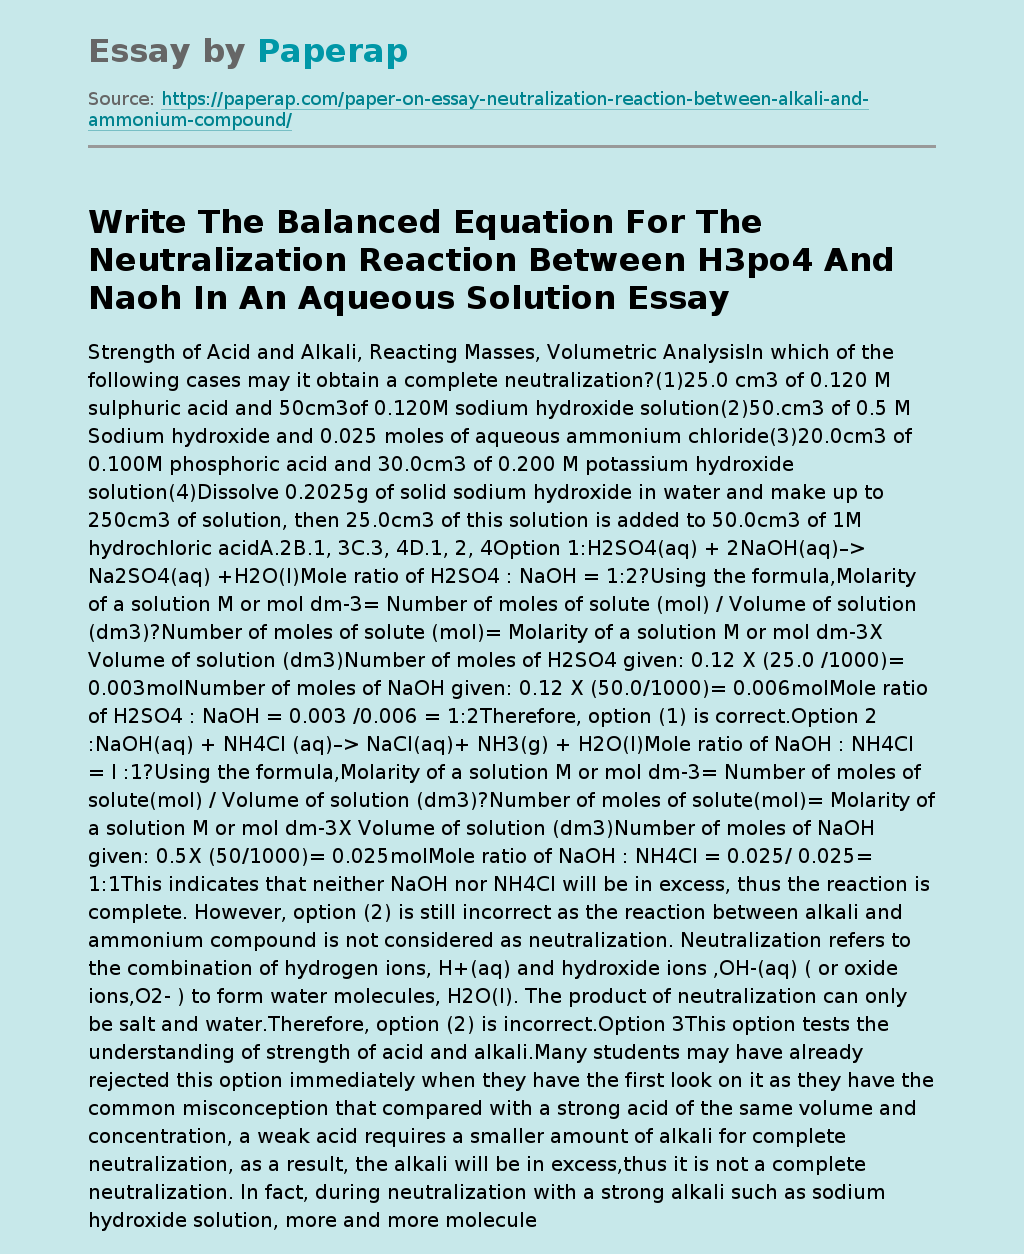 The Neutralization Reaction Between H3po4 And Naoh In An Aqueous Solution